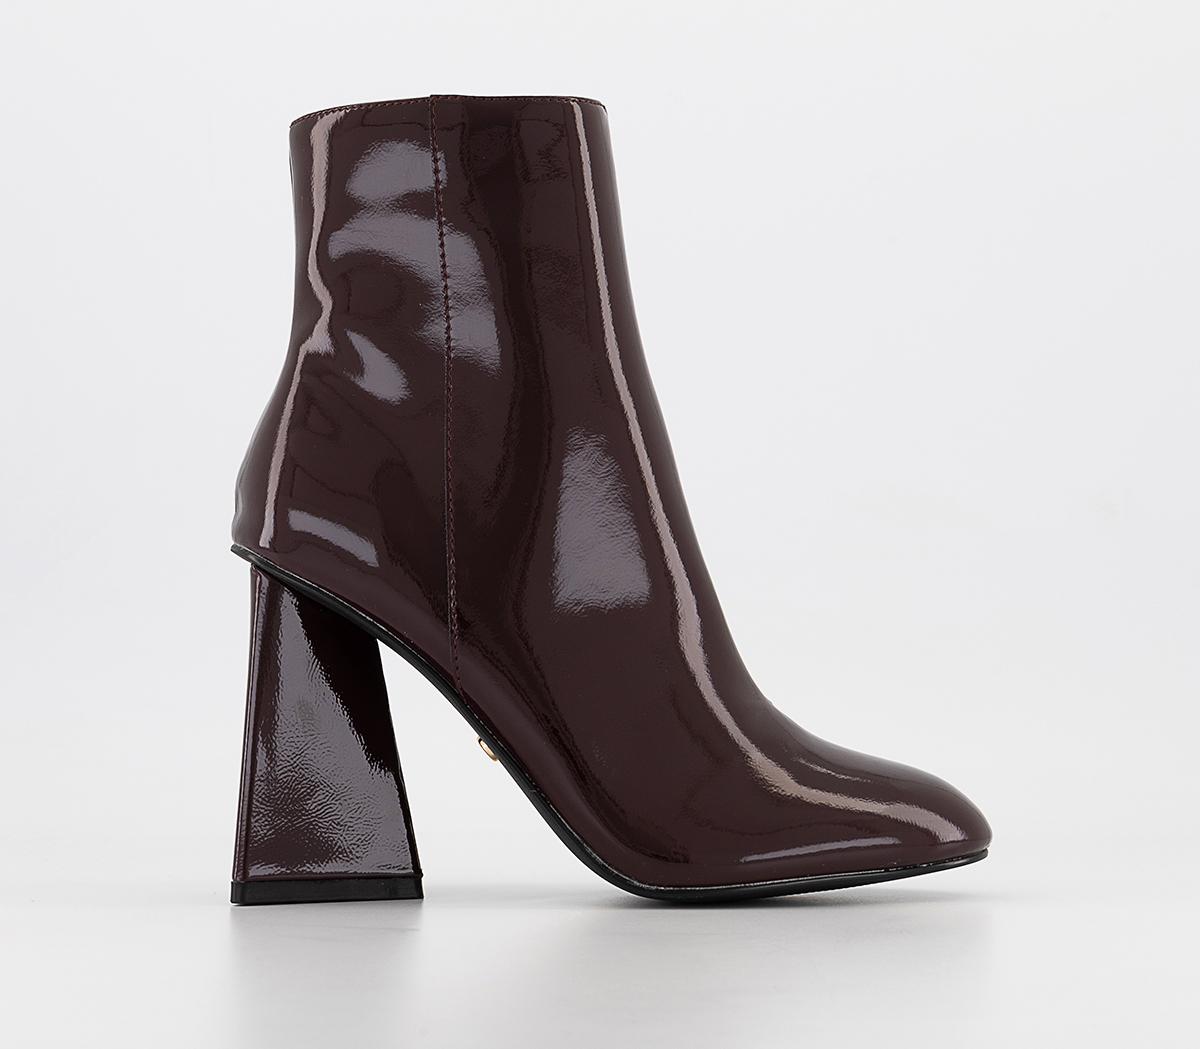 OFFICEAustin Triangle Heel Ankle BootsBurgundy